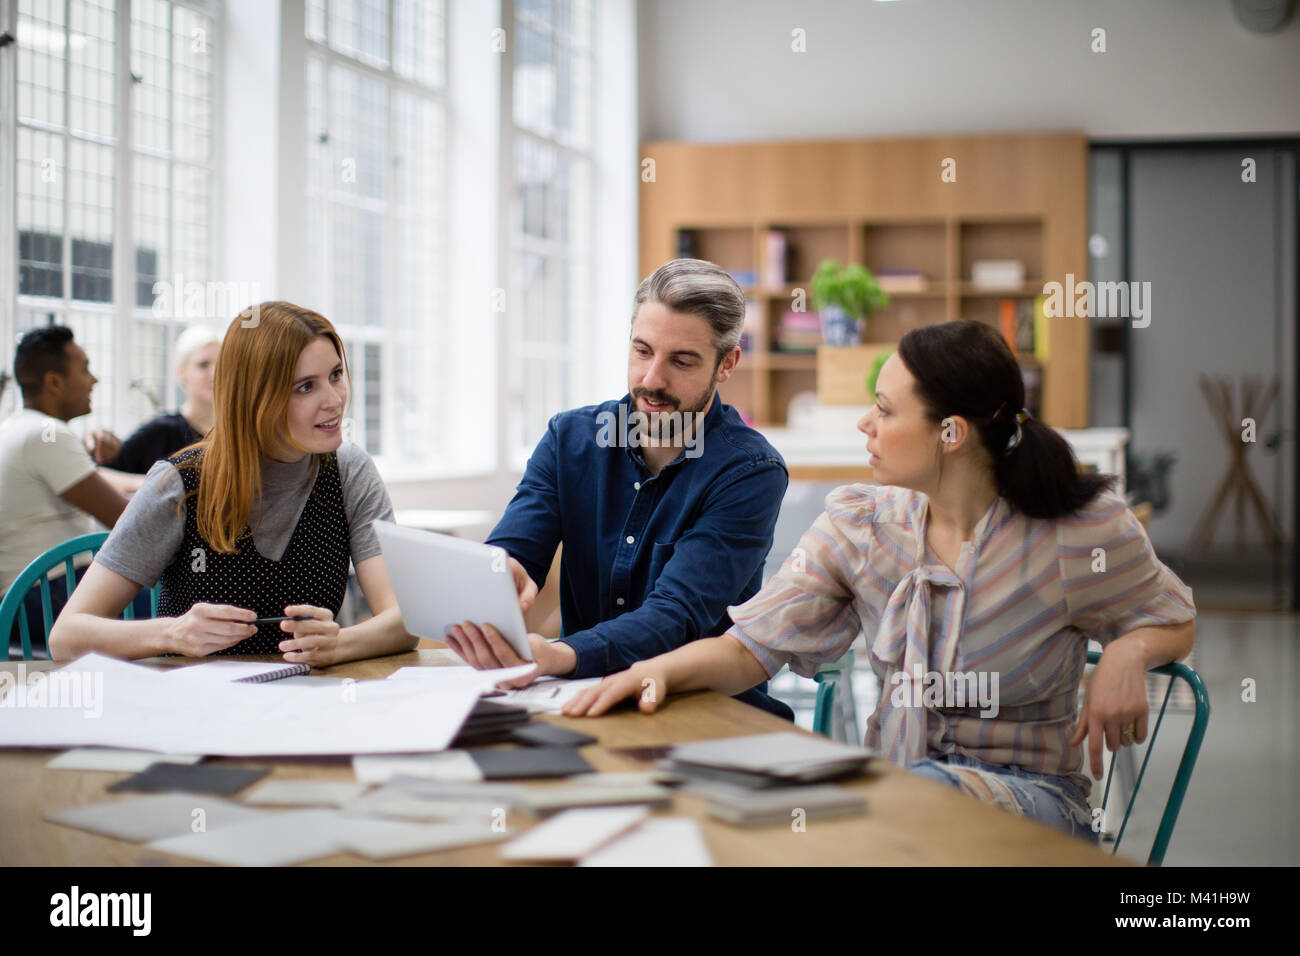 Group of coworkers discussing a project Stock Photo